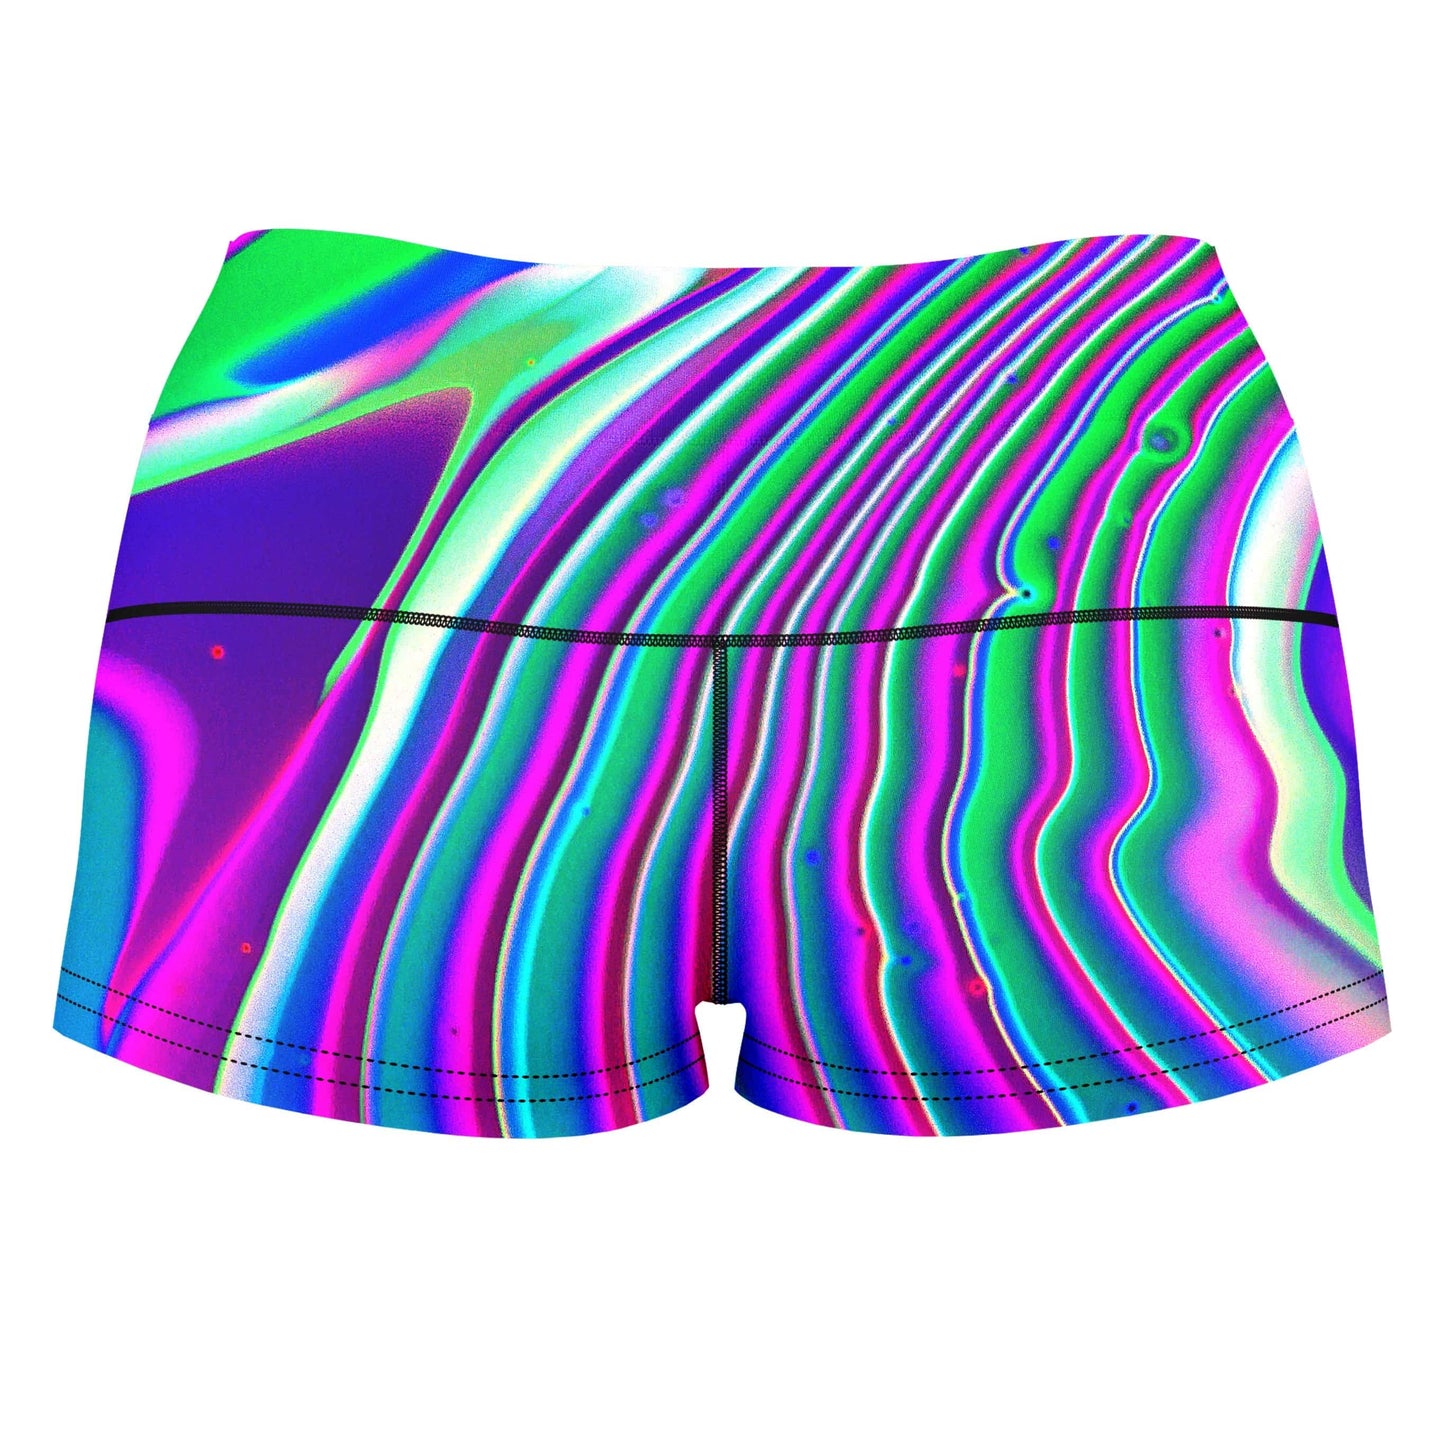 Tangerine Dream High-Waisted Women's Shorts, Psychedelic Pourhouse, | iEDM